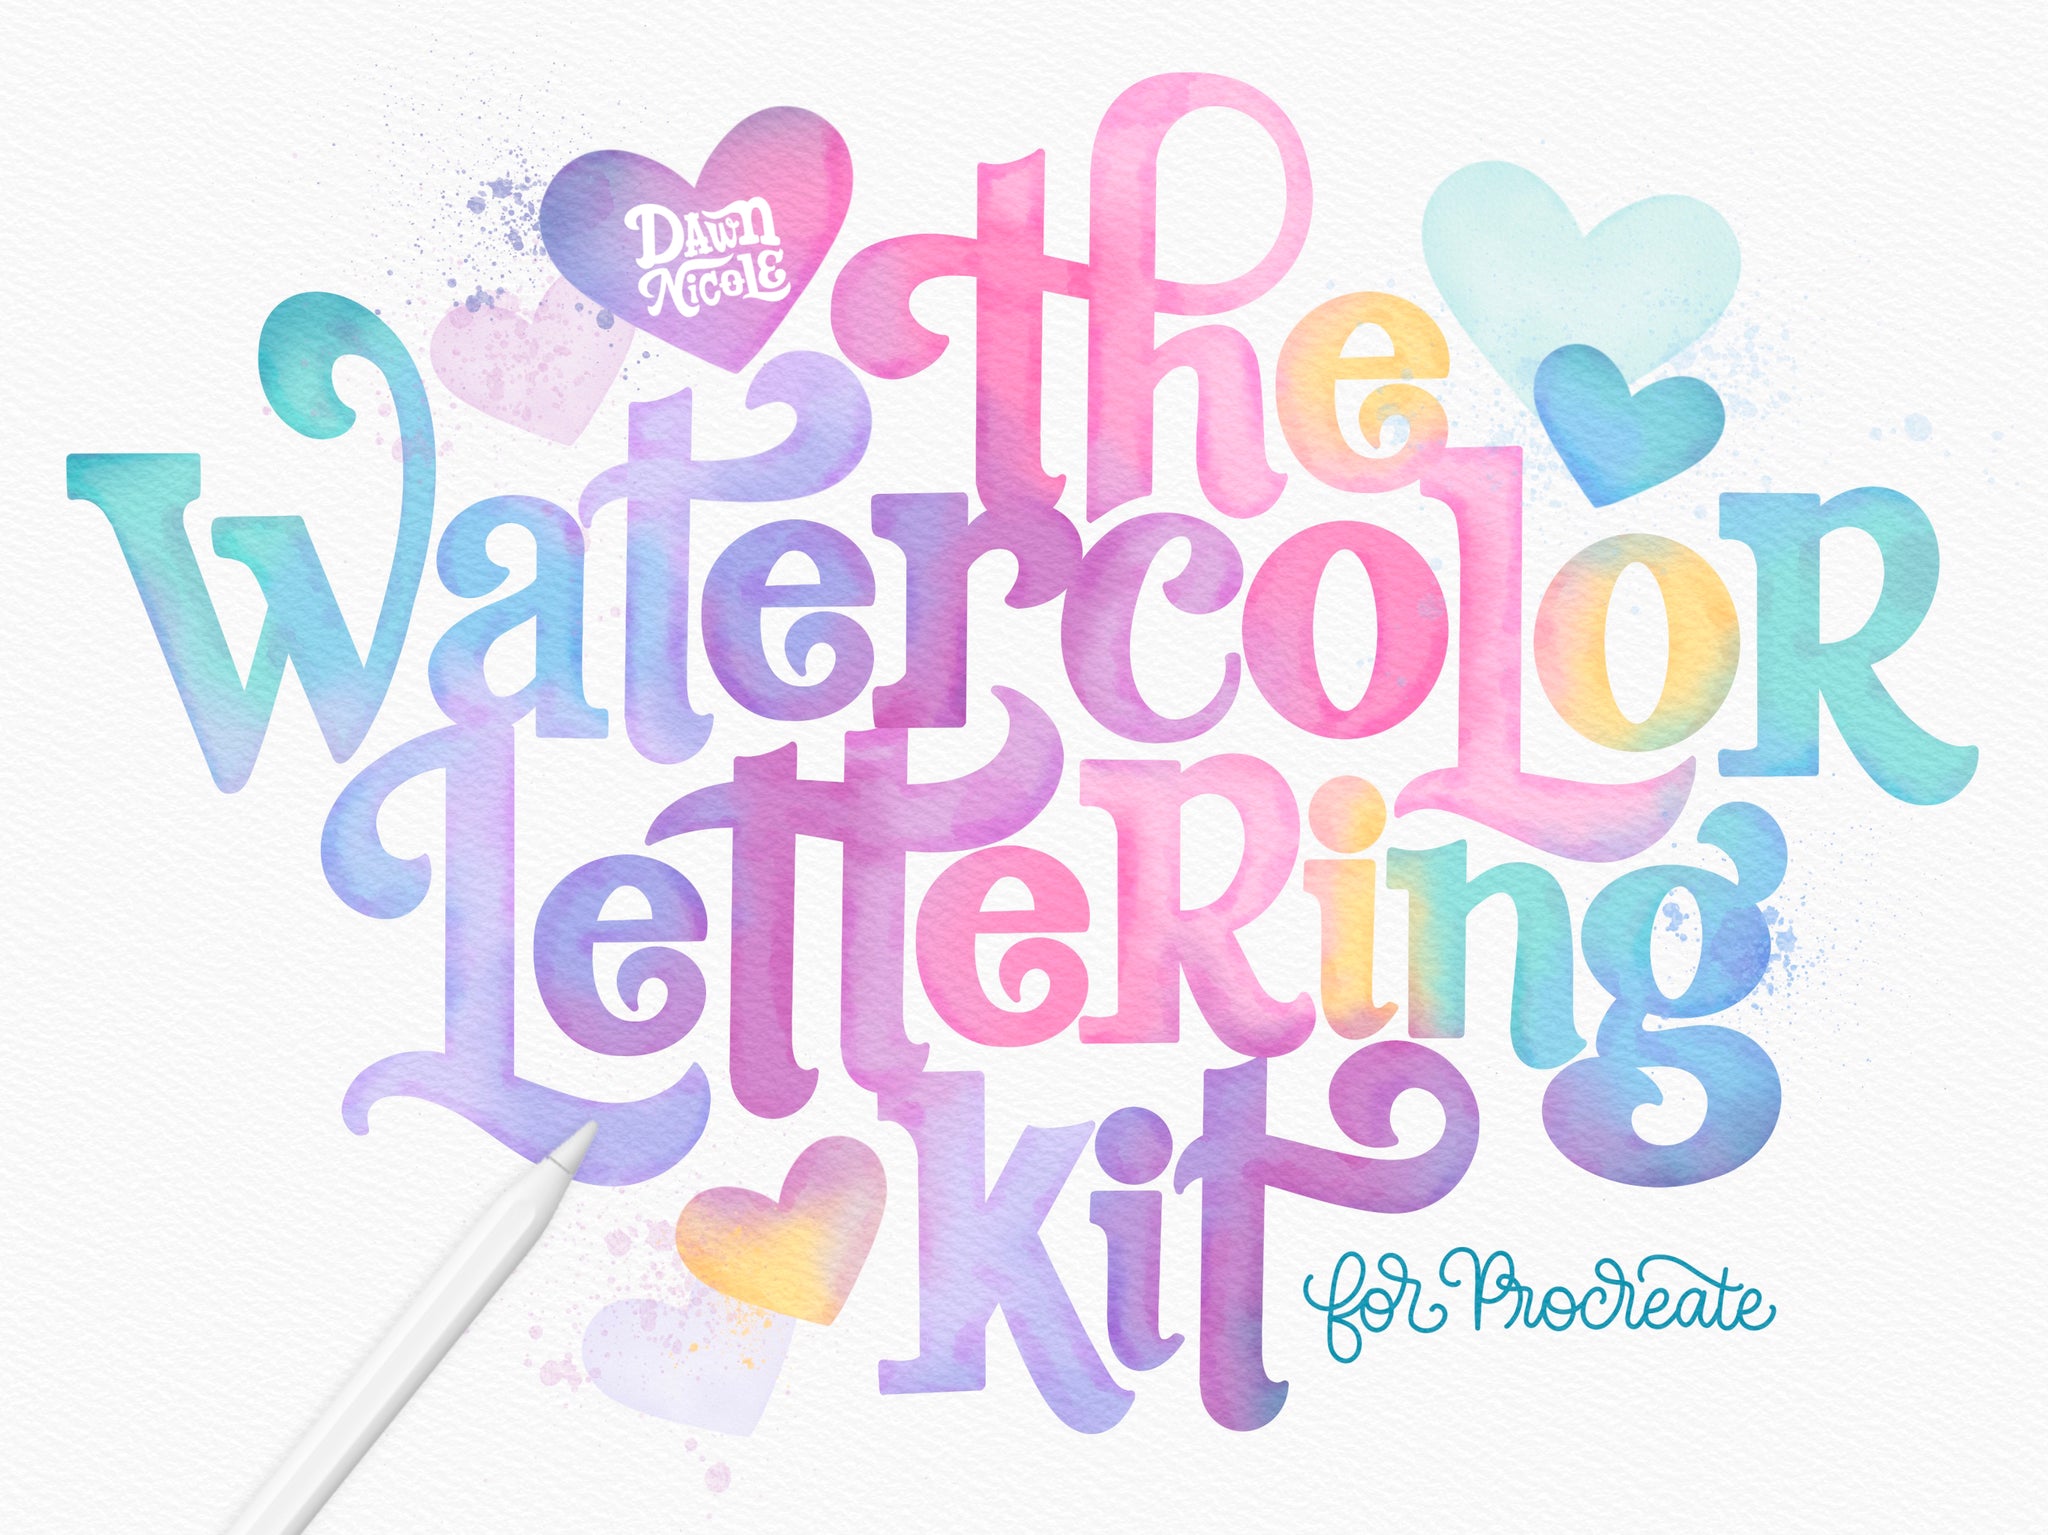 The Watercolor Lettering Kit for Procreate – Dawn Nicole 💖 Lettering Shop